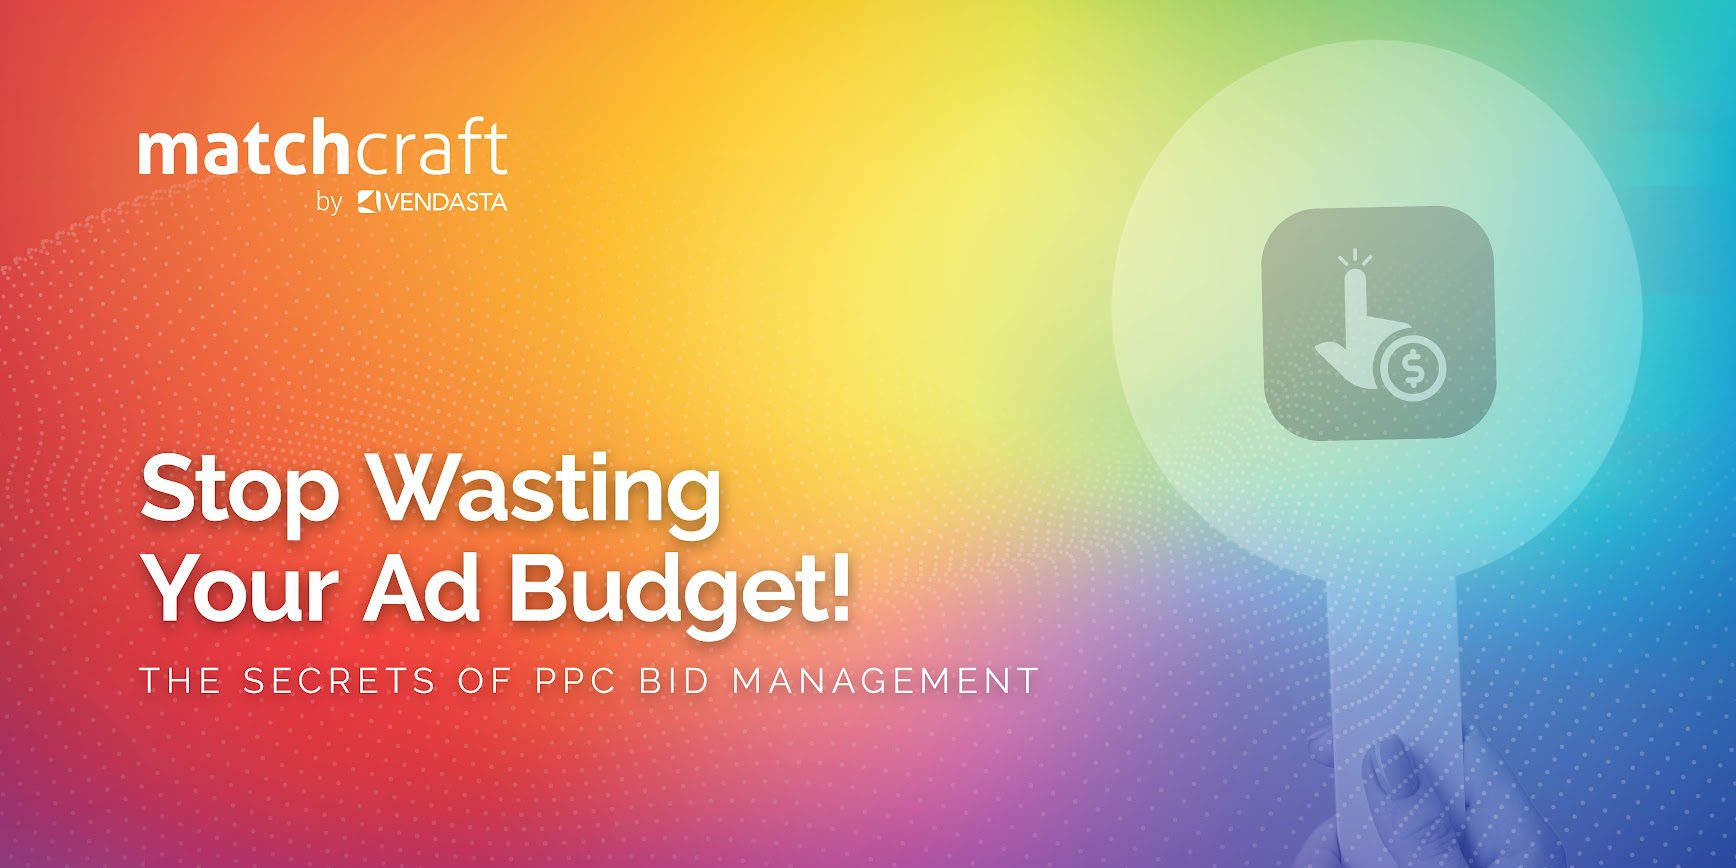 Stop Wasting Your Ad Budget! The Secrets of PPC Bid Management Exposed